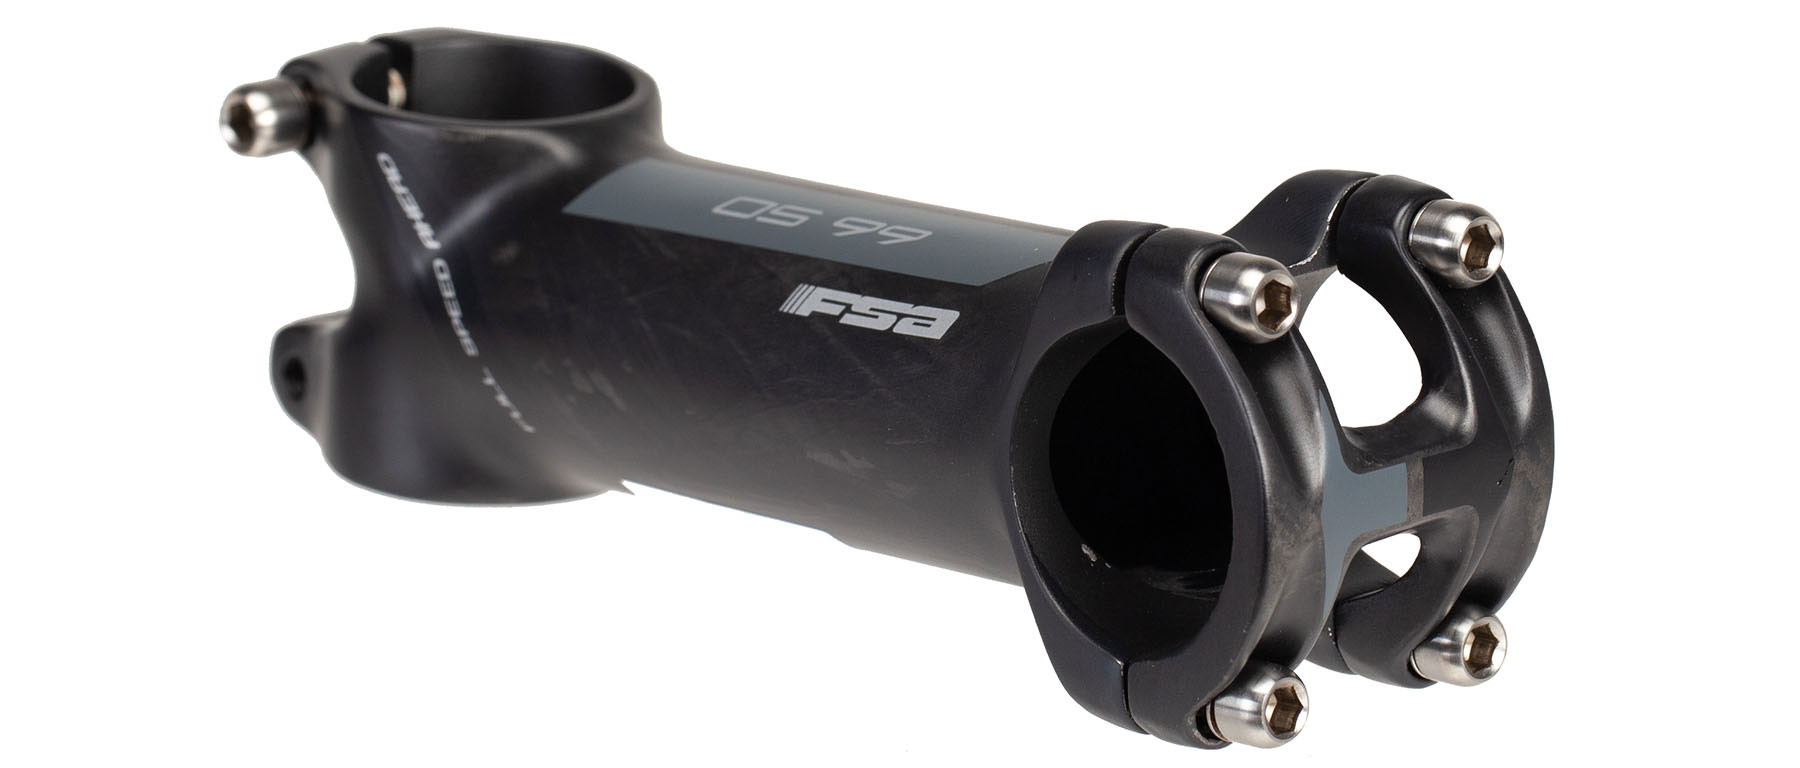 Full Speed Ahead K-Force OS-99 Carbon Stem